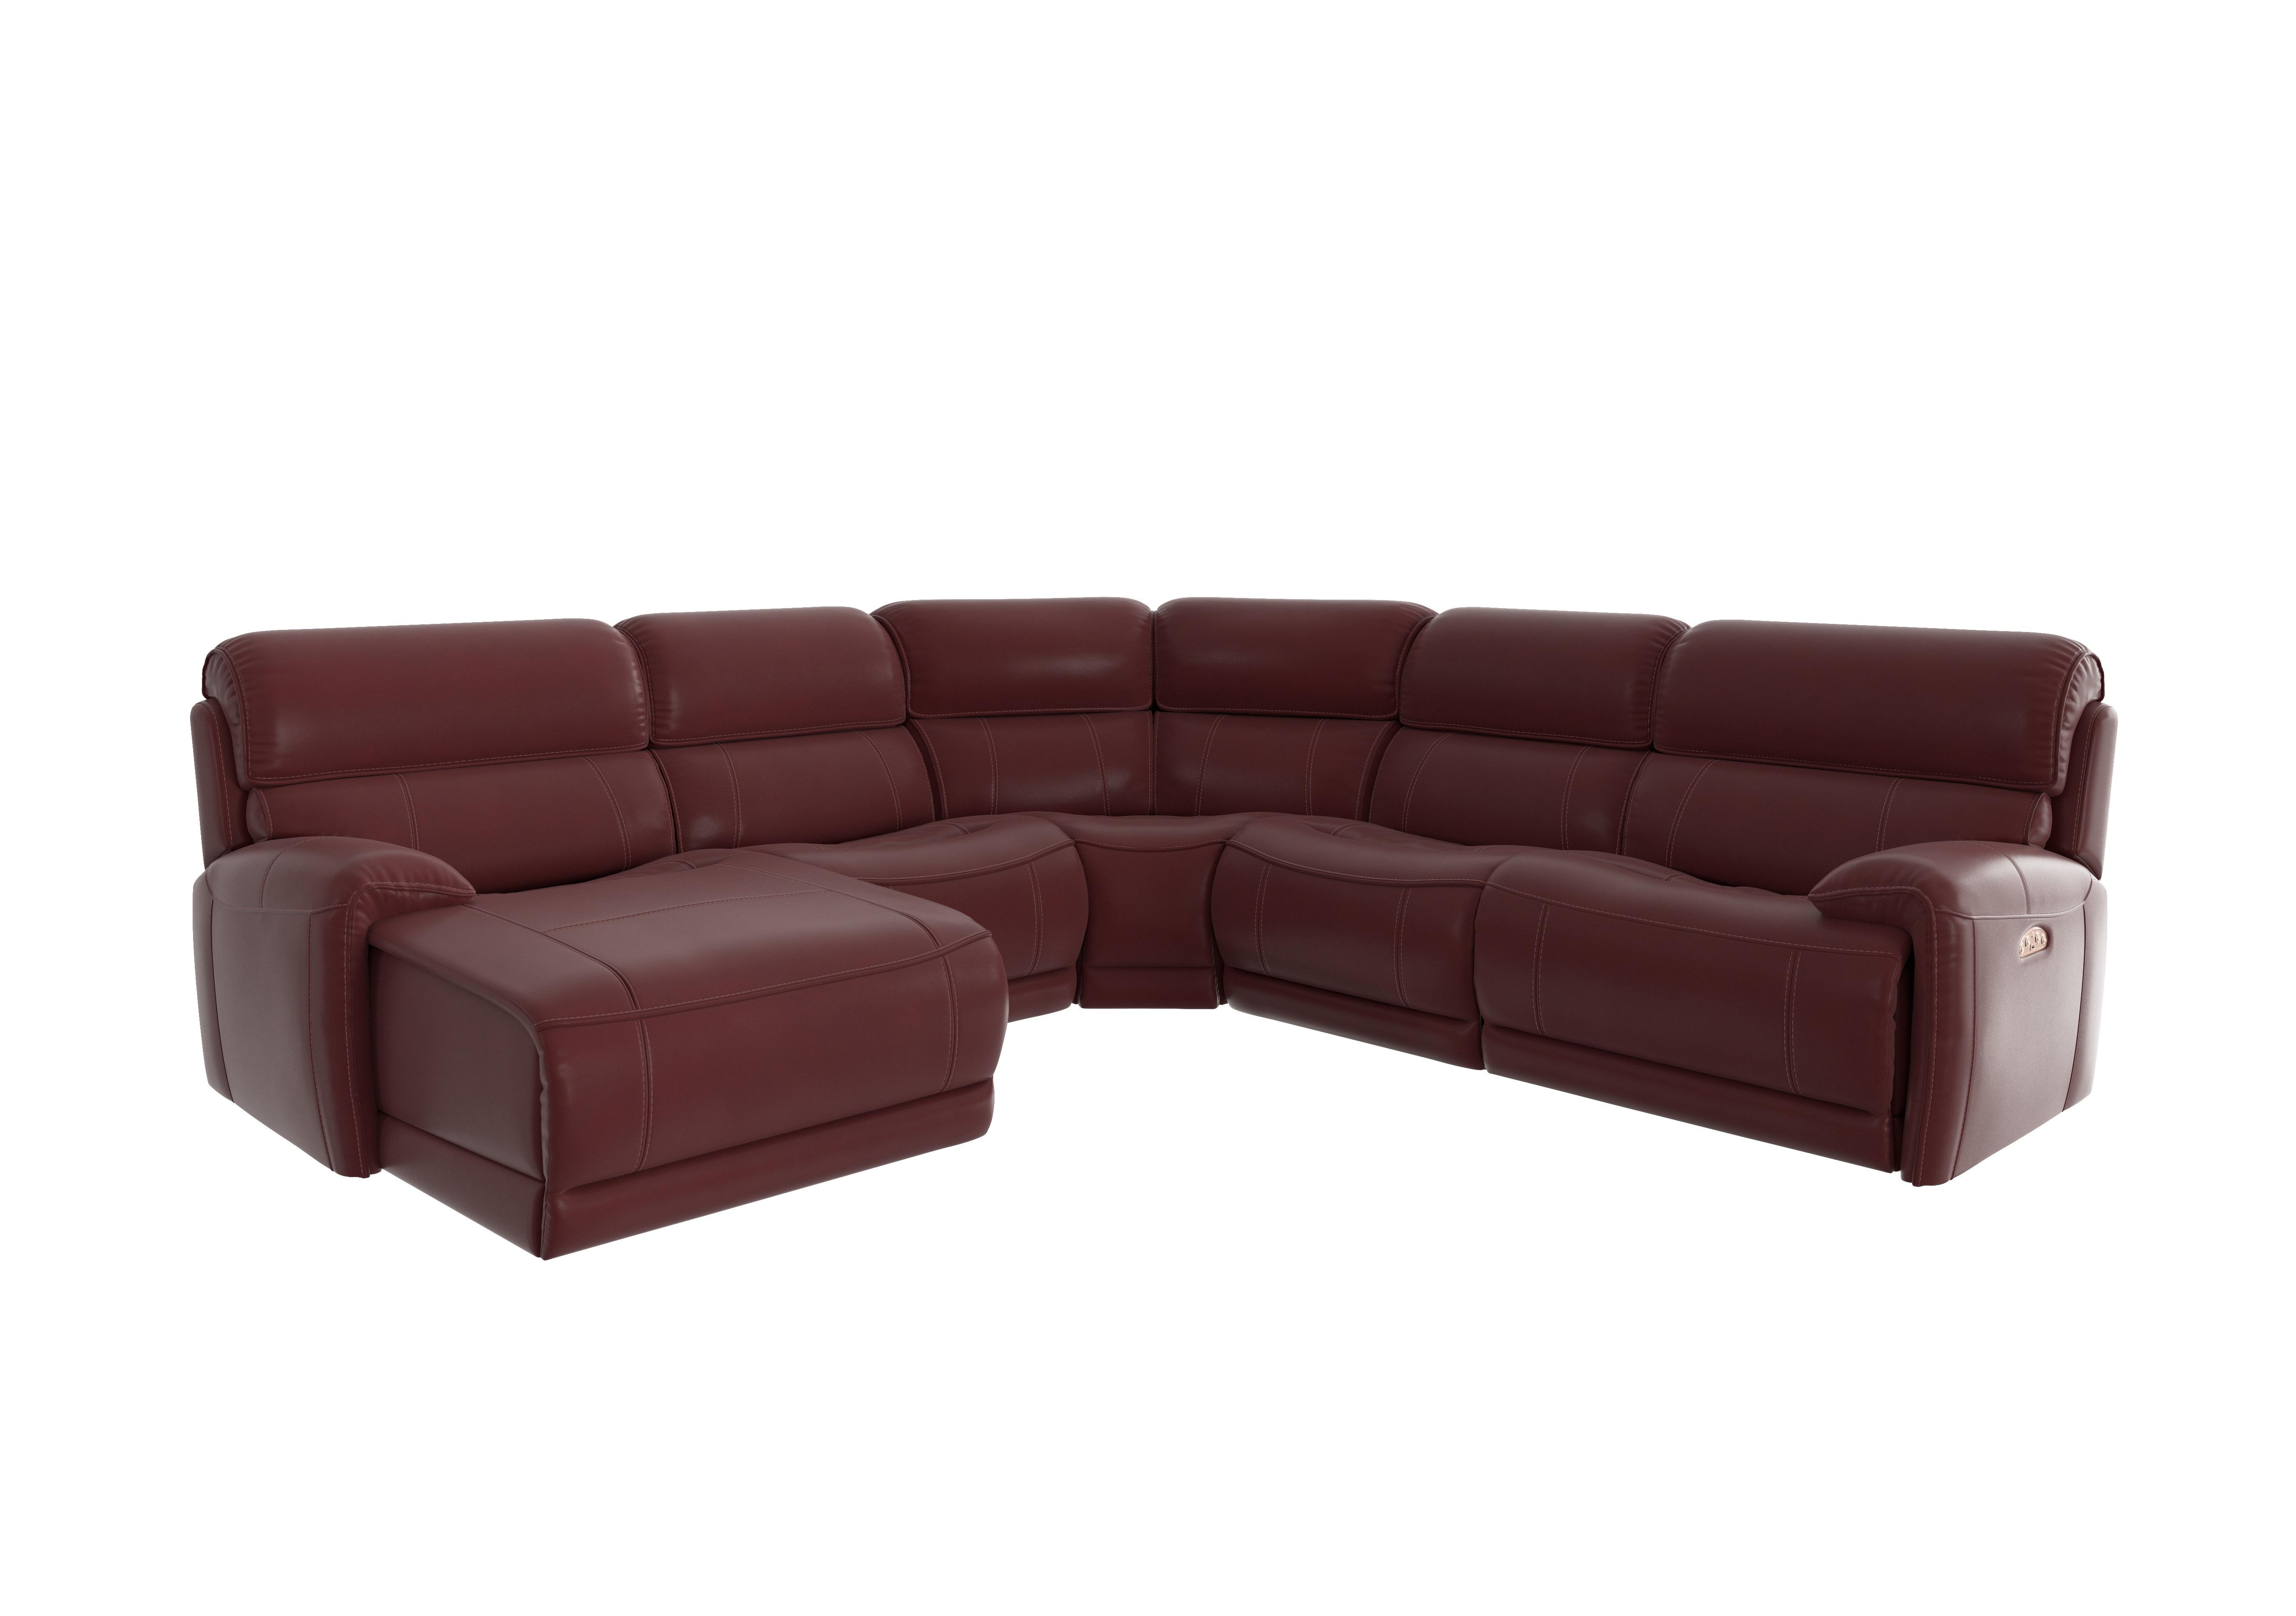 Link Leather Corner Chaise Power Sofa in Bv-035c Deep Red on Furniture Village